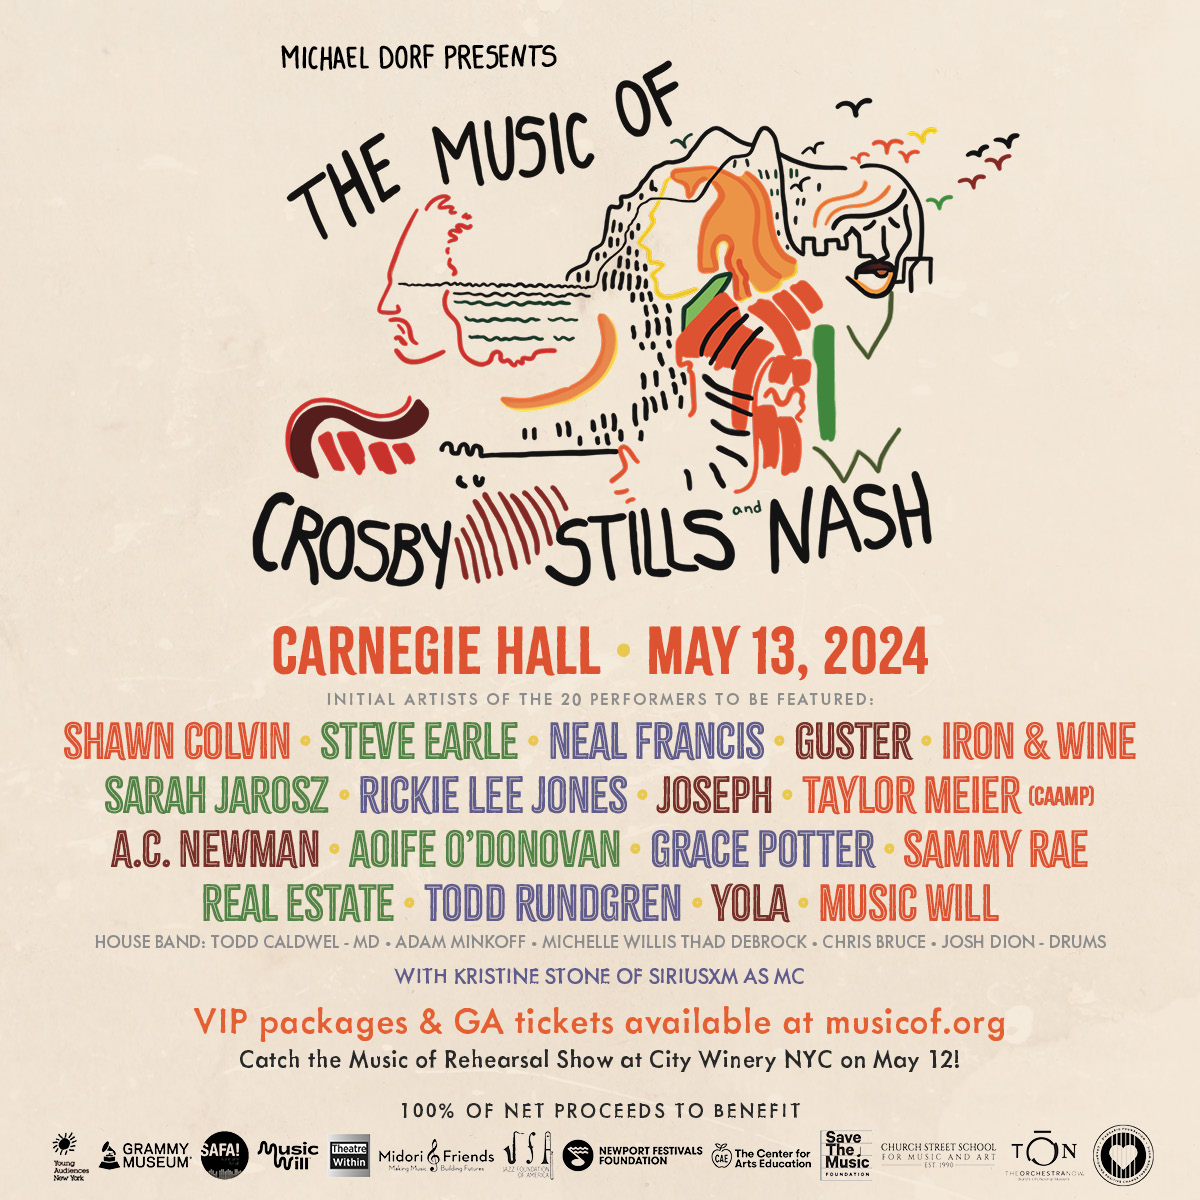 Iron & Wine, The New Pornographers' A.C. Newman, Todd Rundgren, Steve Earle, Grace Potter, Yola, Rickie Lee Jones & more will celebrate the music of Crosby, Stills & Nash at Carneige Hall on Monday: bit.ly/3UTMuk4